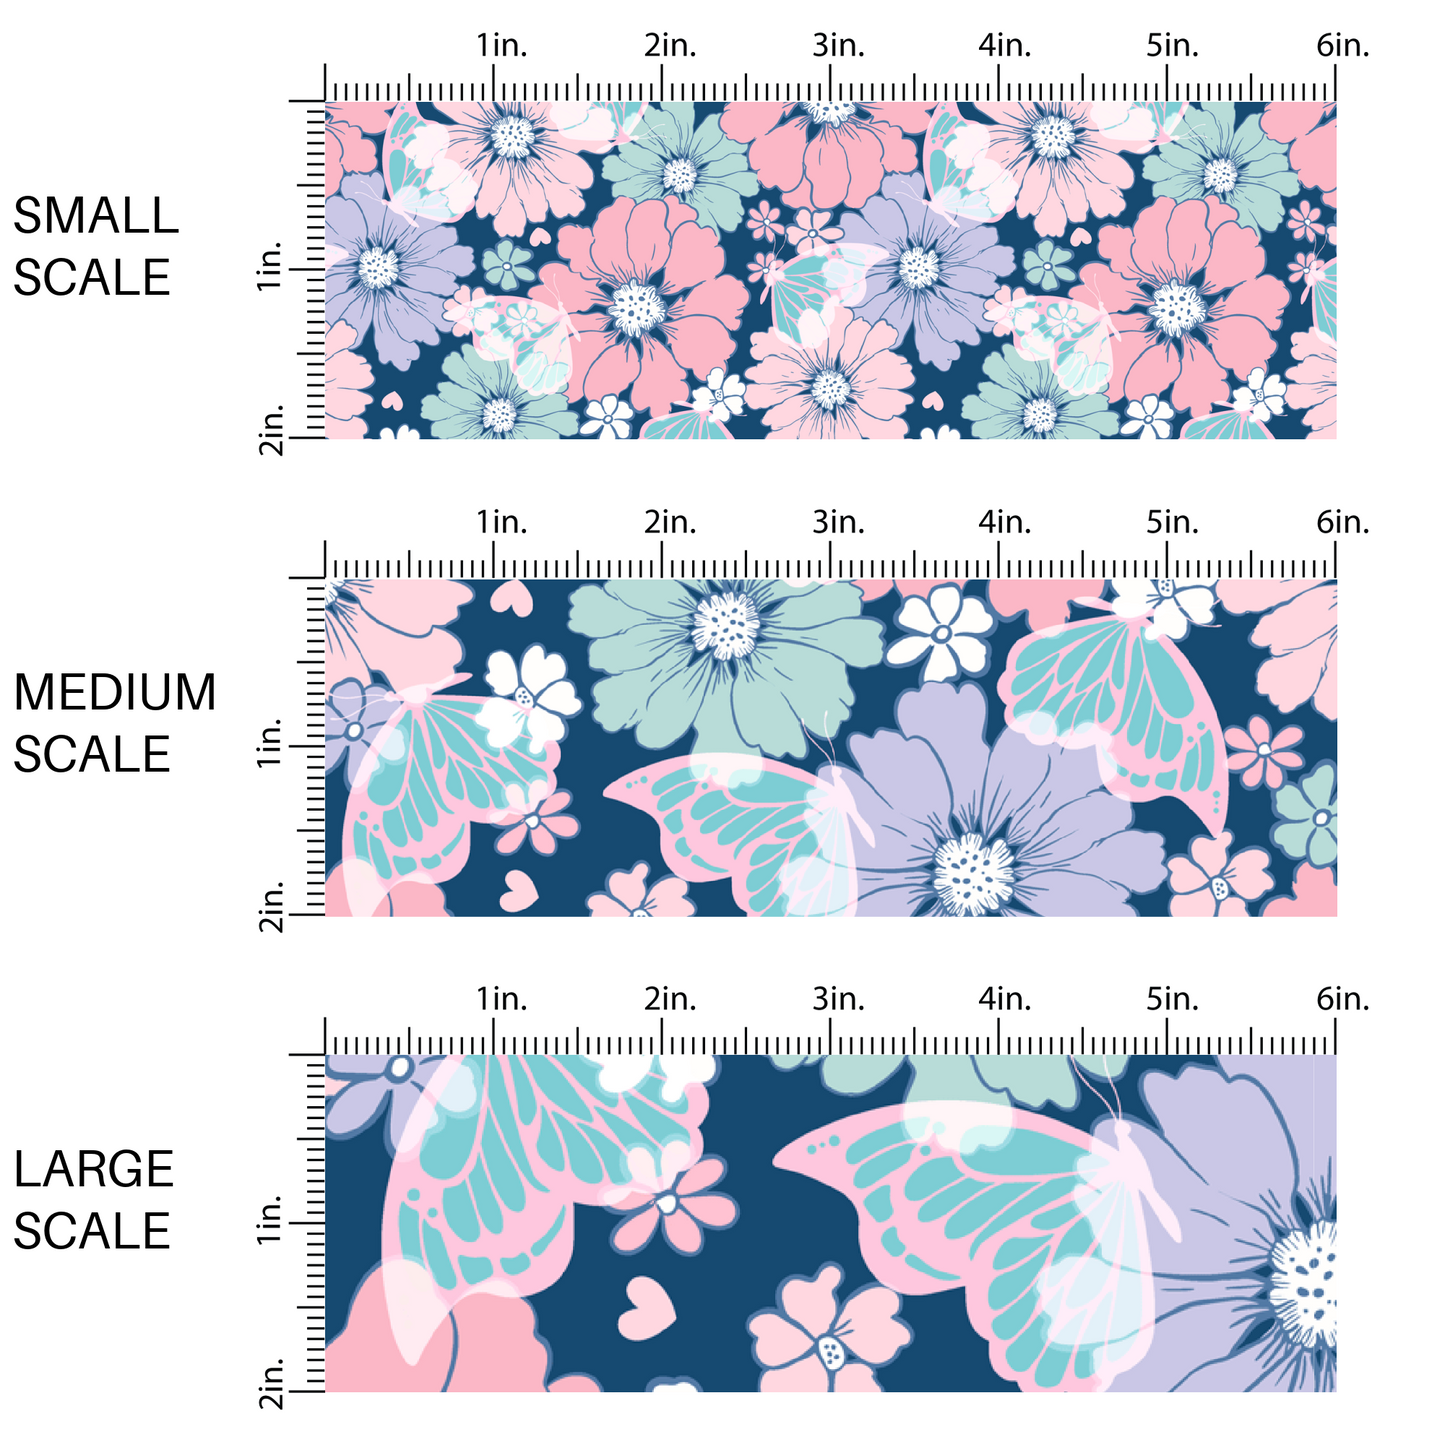 This image has three fabric scales of small, medium, and large scale for the pastel flowers in pink, aqua, purple, and white with aqua butterflies on dark navy blue fabric by the yard.